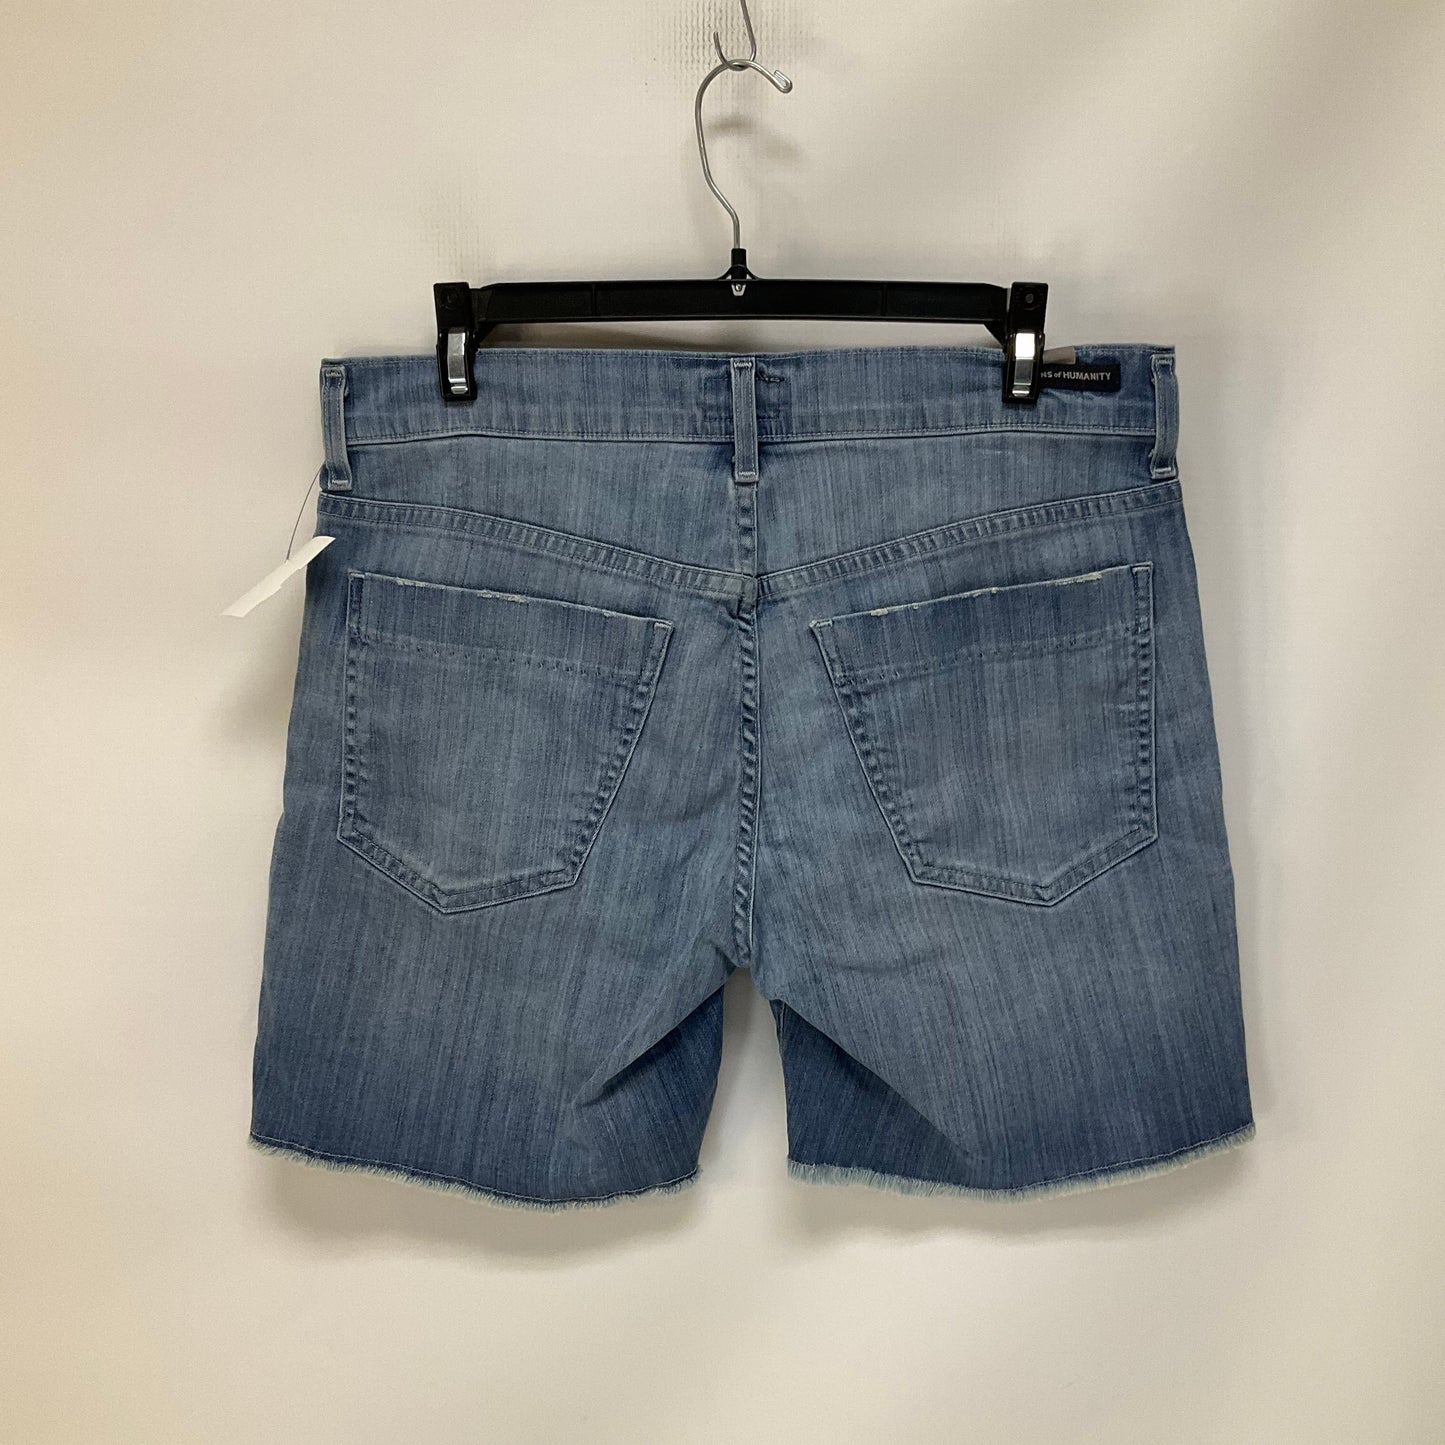 Shorts By Citizens Of Humanity  Size: 4